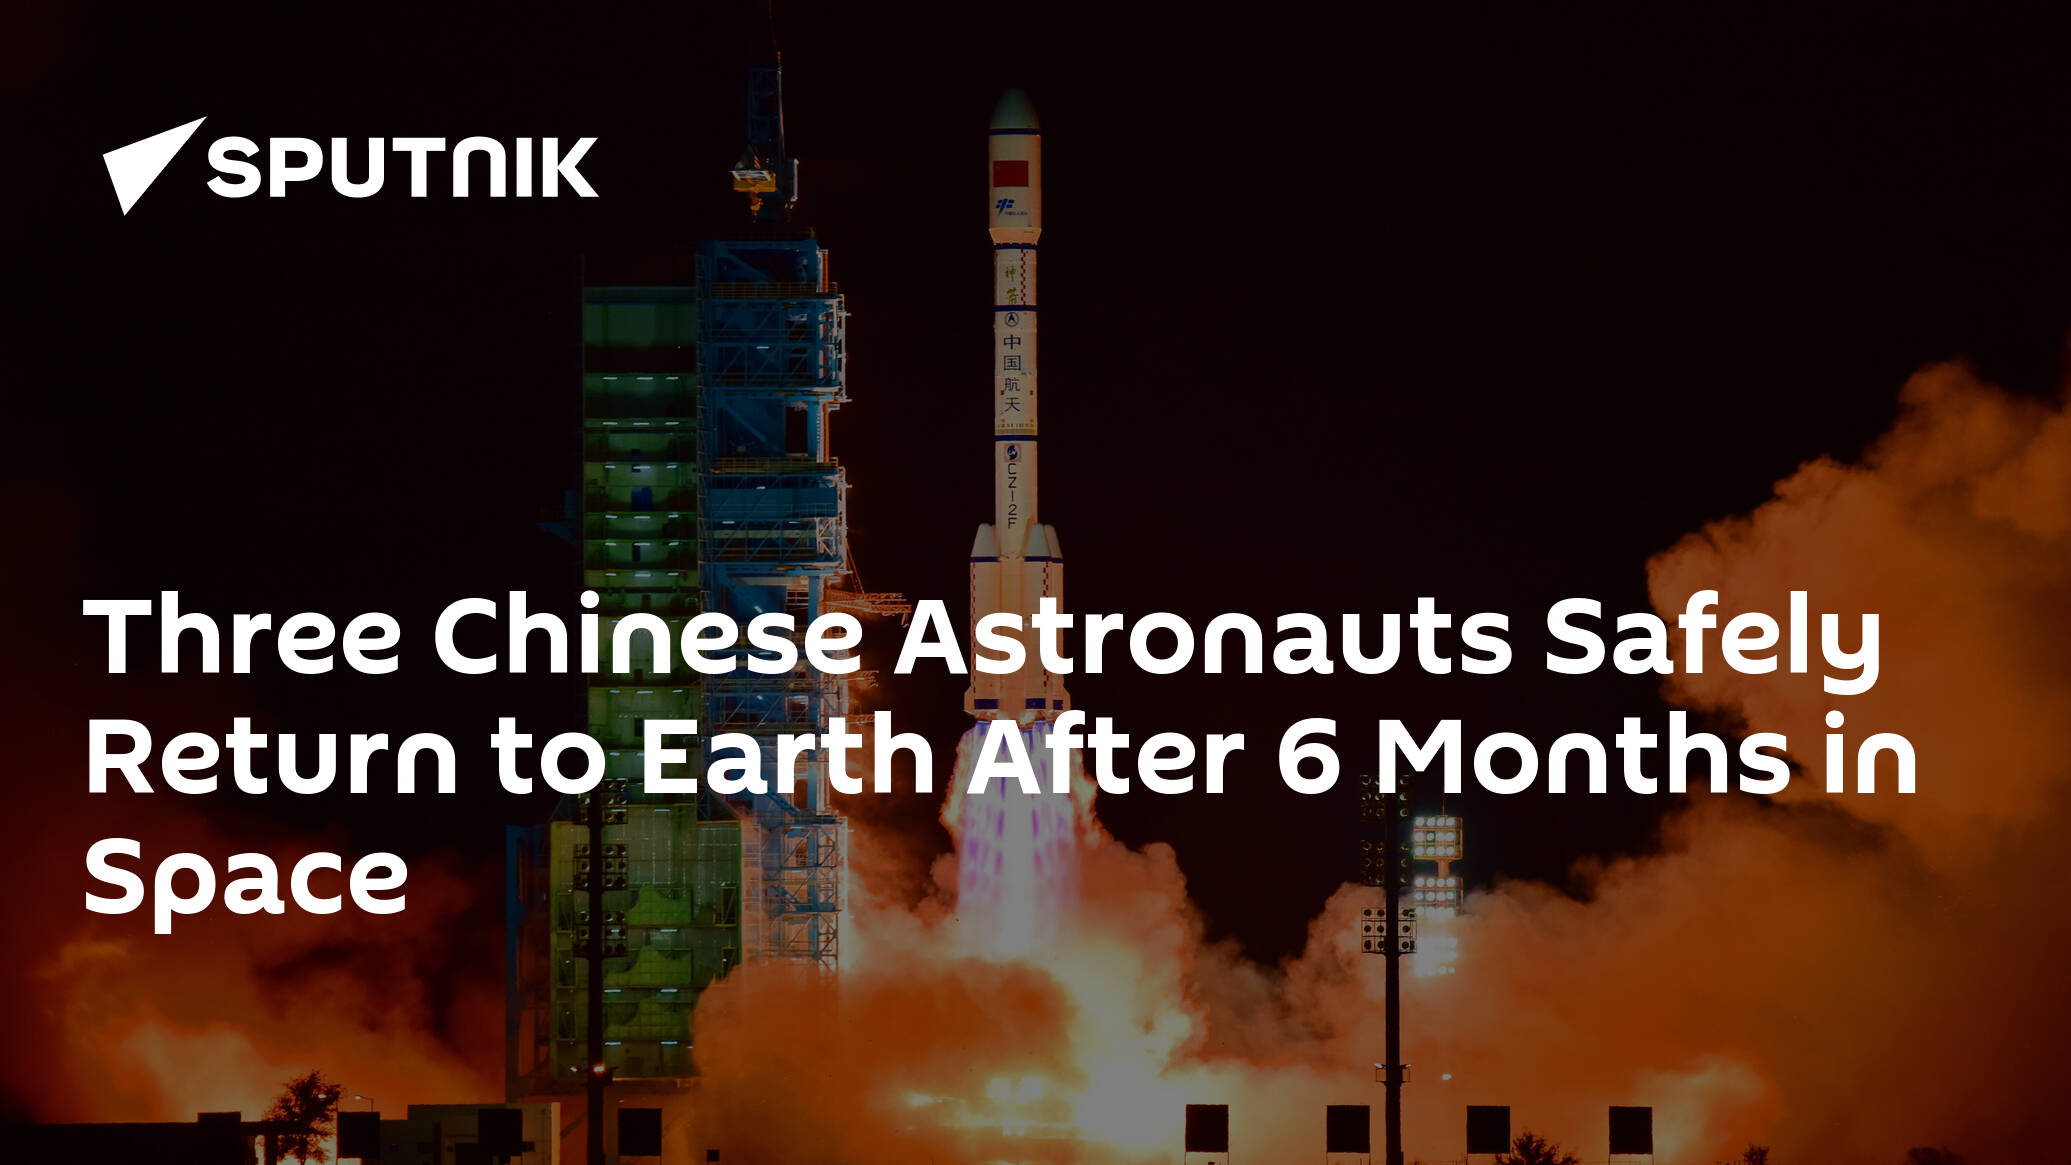 Three Chinese Astronauts Safely Return to Earth After 6 Months in Space